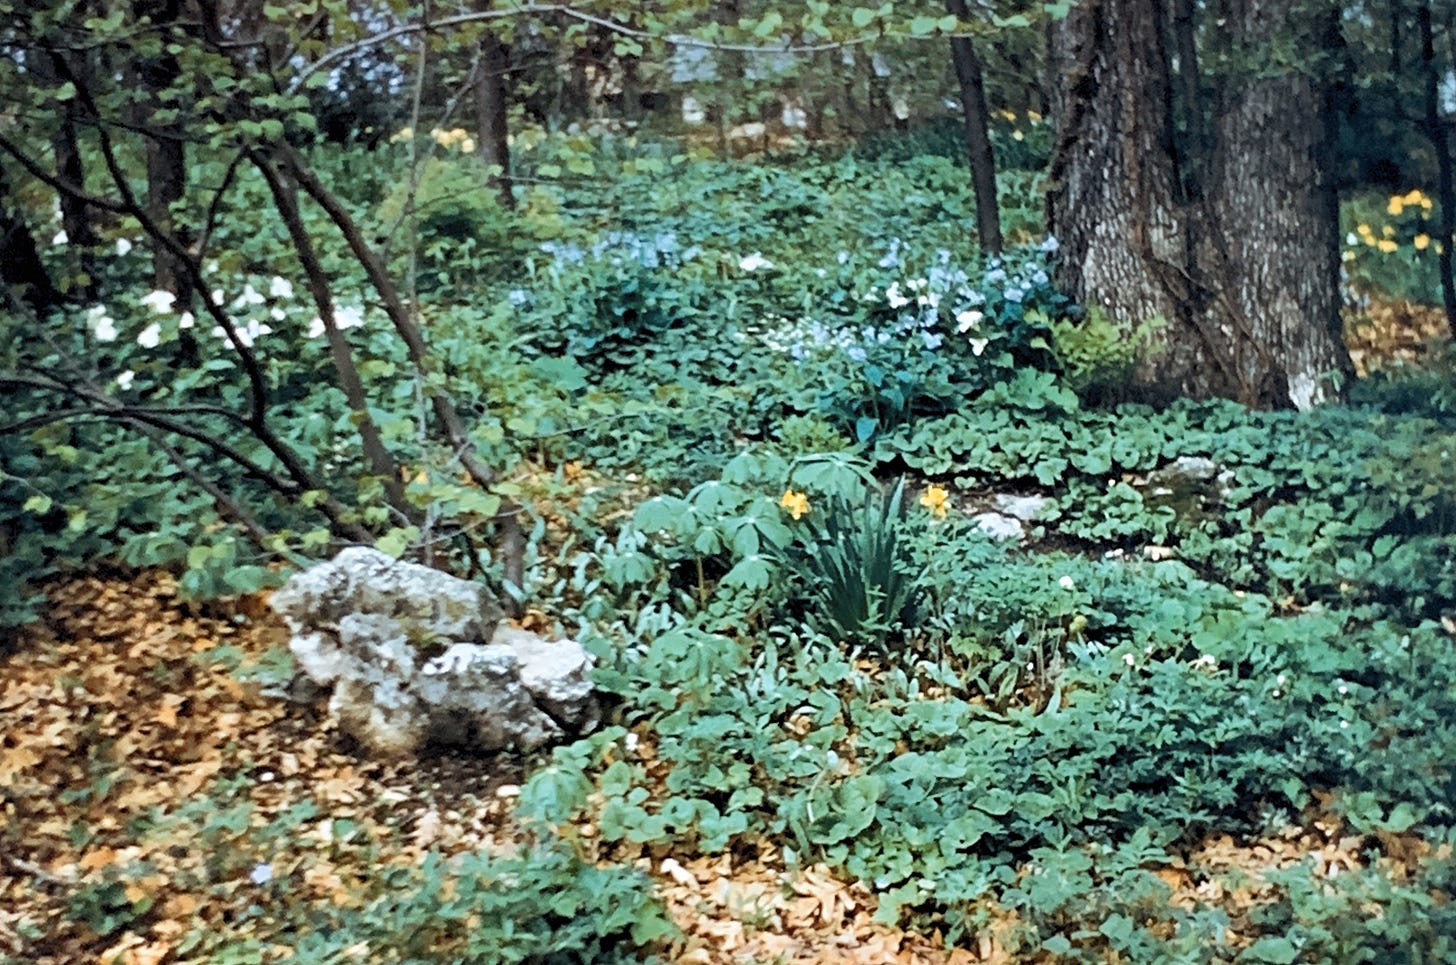 A garden with many green plants scattered with some leaf litter. There is a chain link fence at the back and a large decorative rock to the left side.